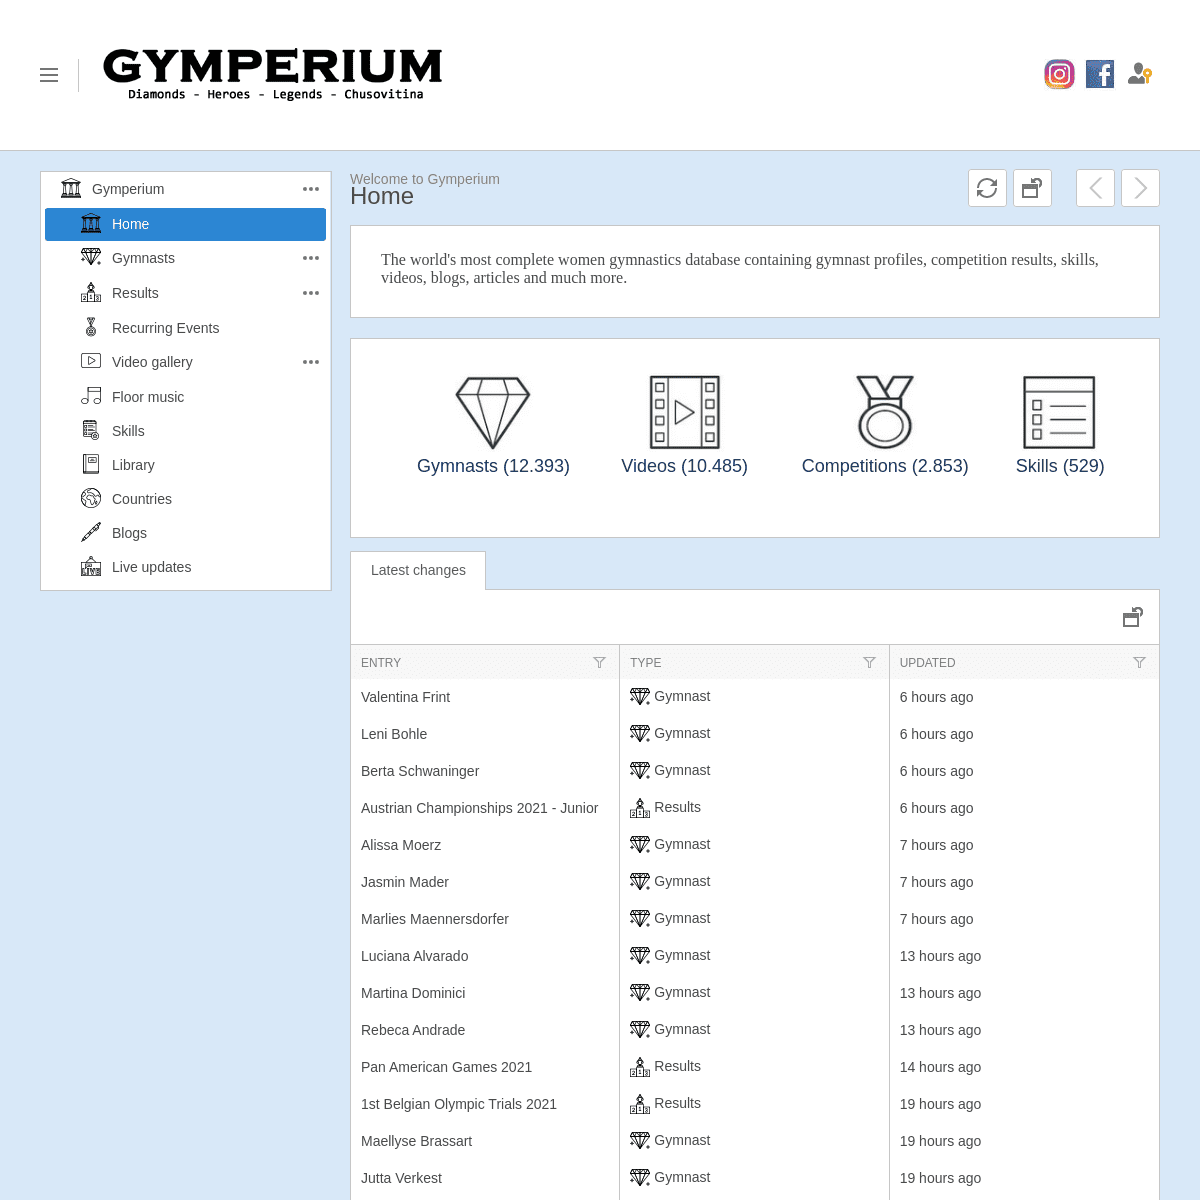 A complete backup of https://gymperium.eu